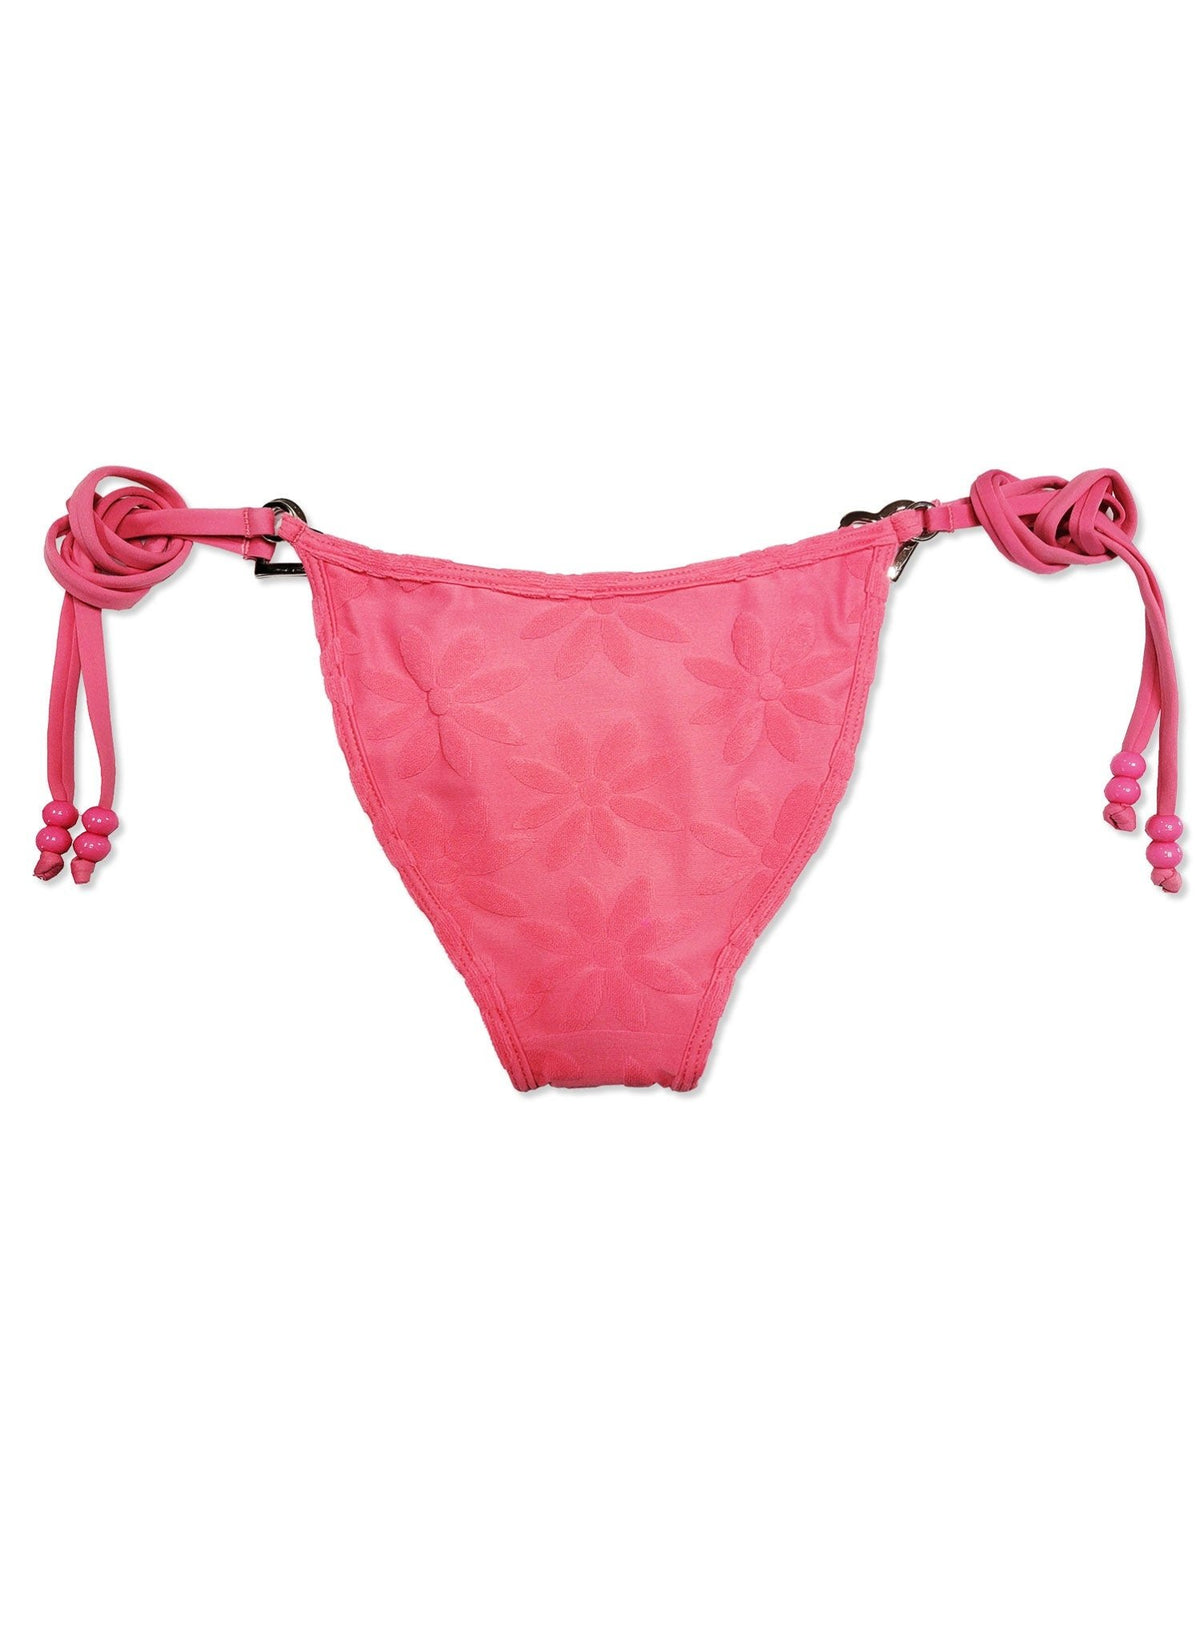 Terry Side Tie Bottom - Cheeky - Ditsy Daisy Pink